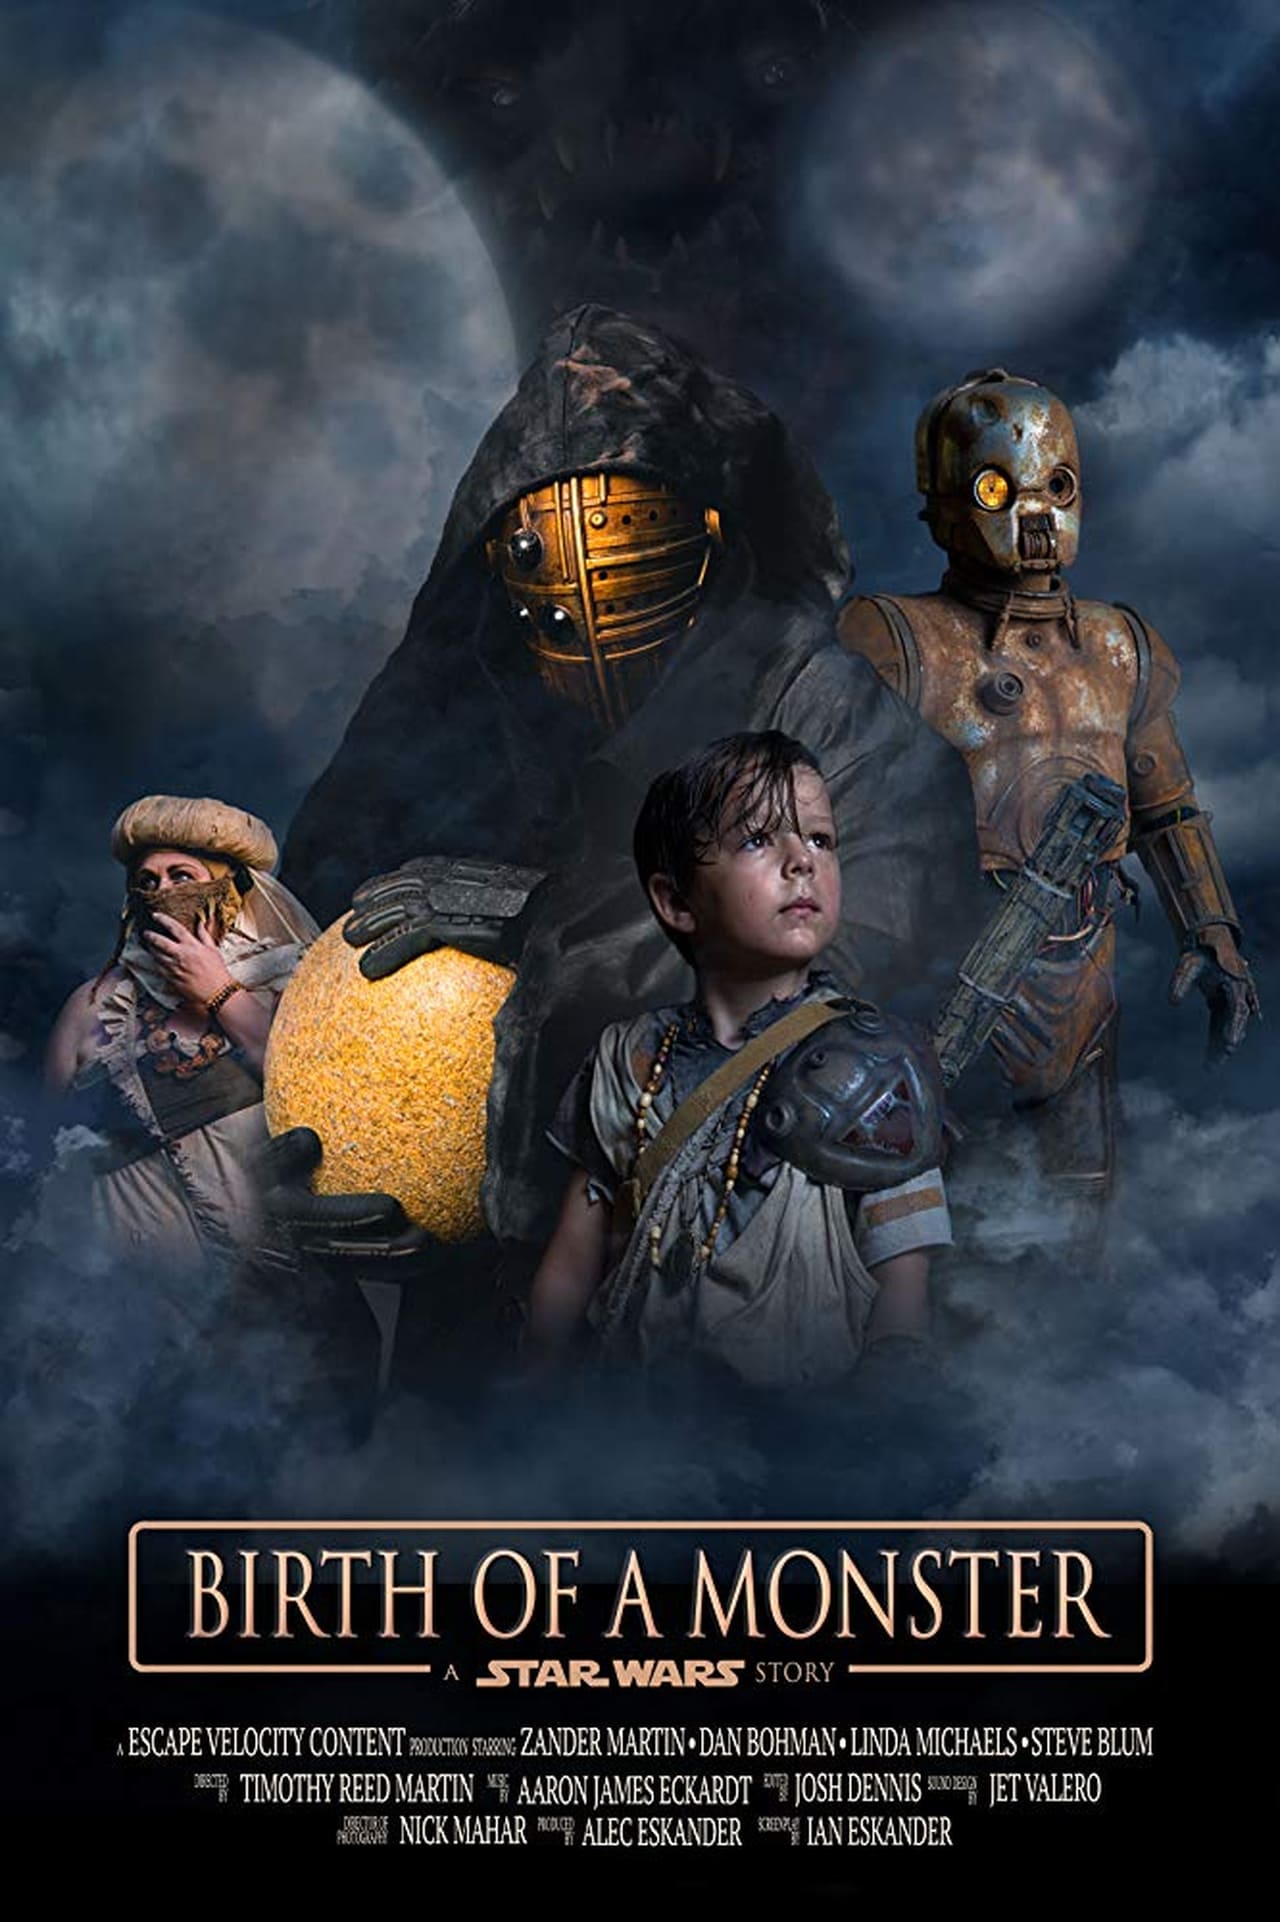 Star Wars: Tales Of The Twin Suns, Episode One: Birth Of A Monster (2019)